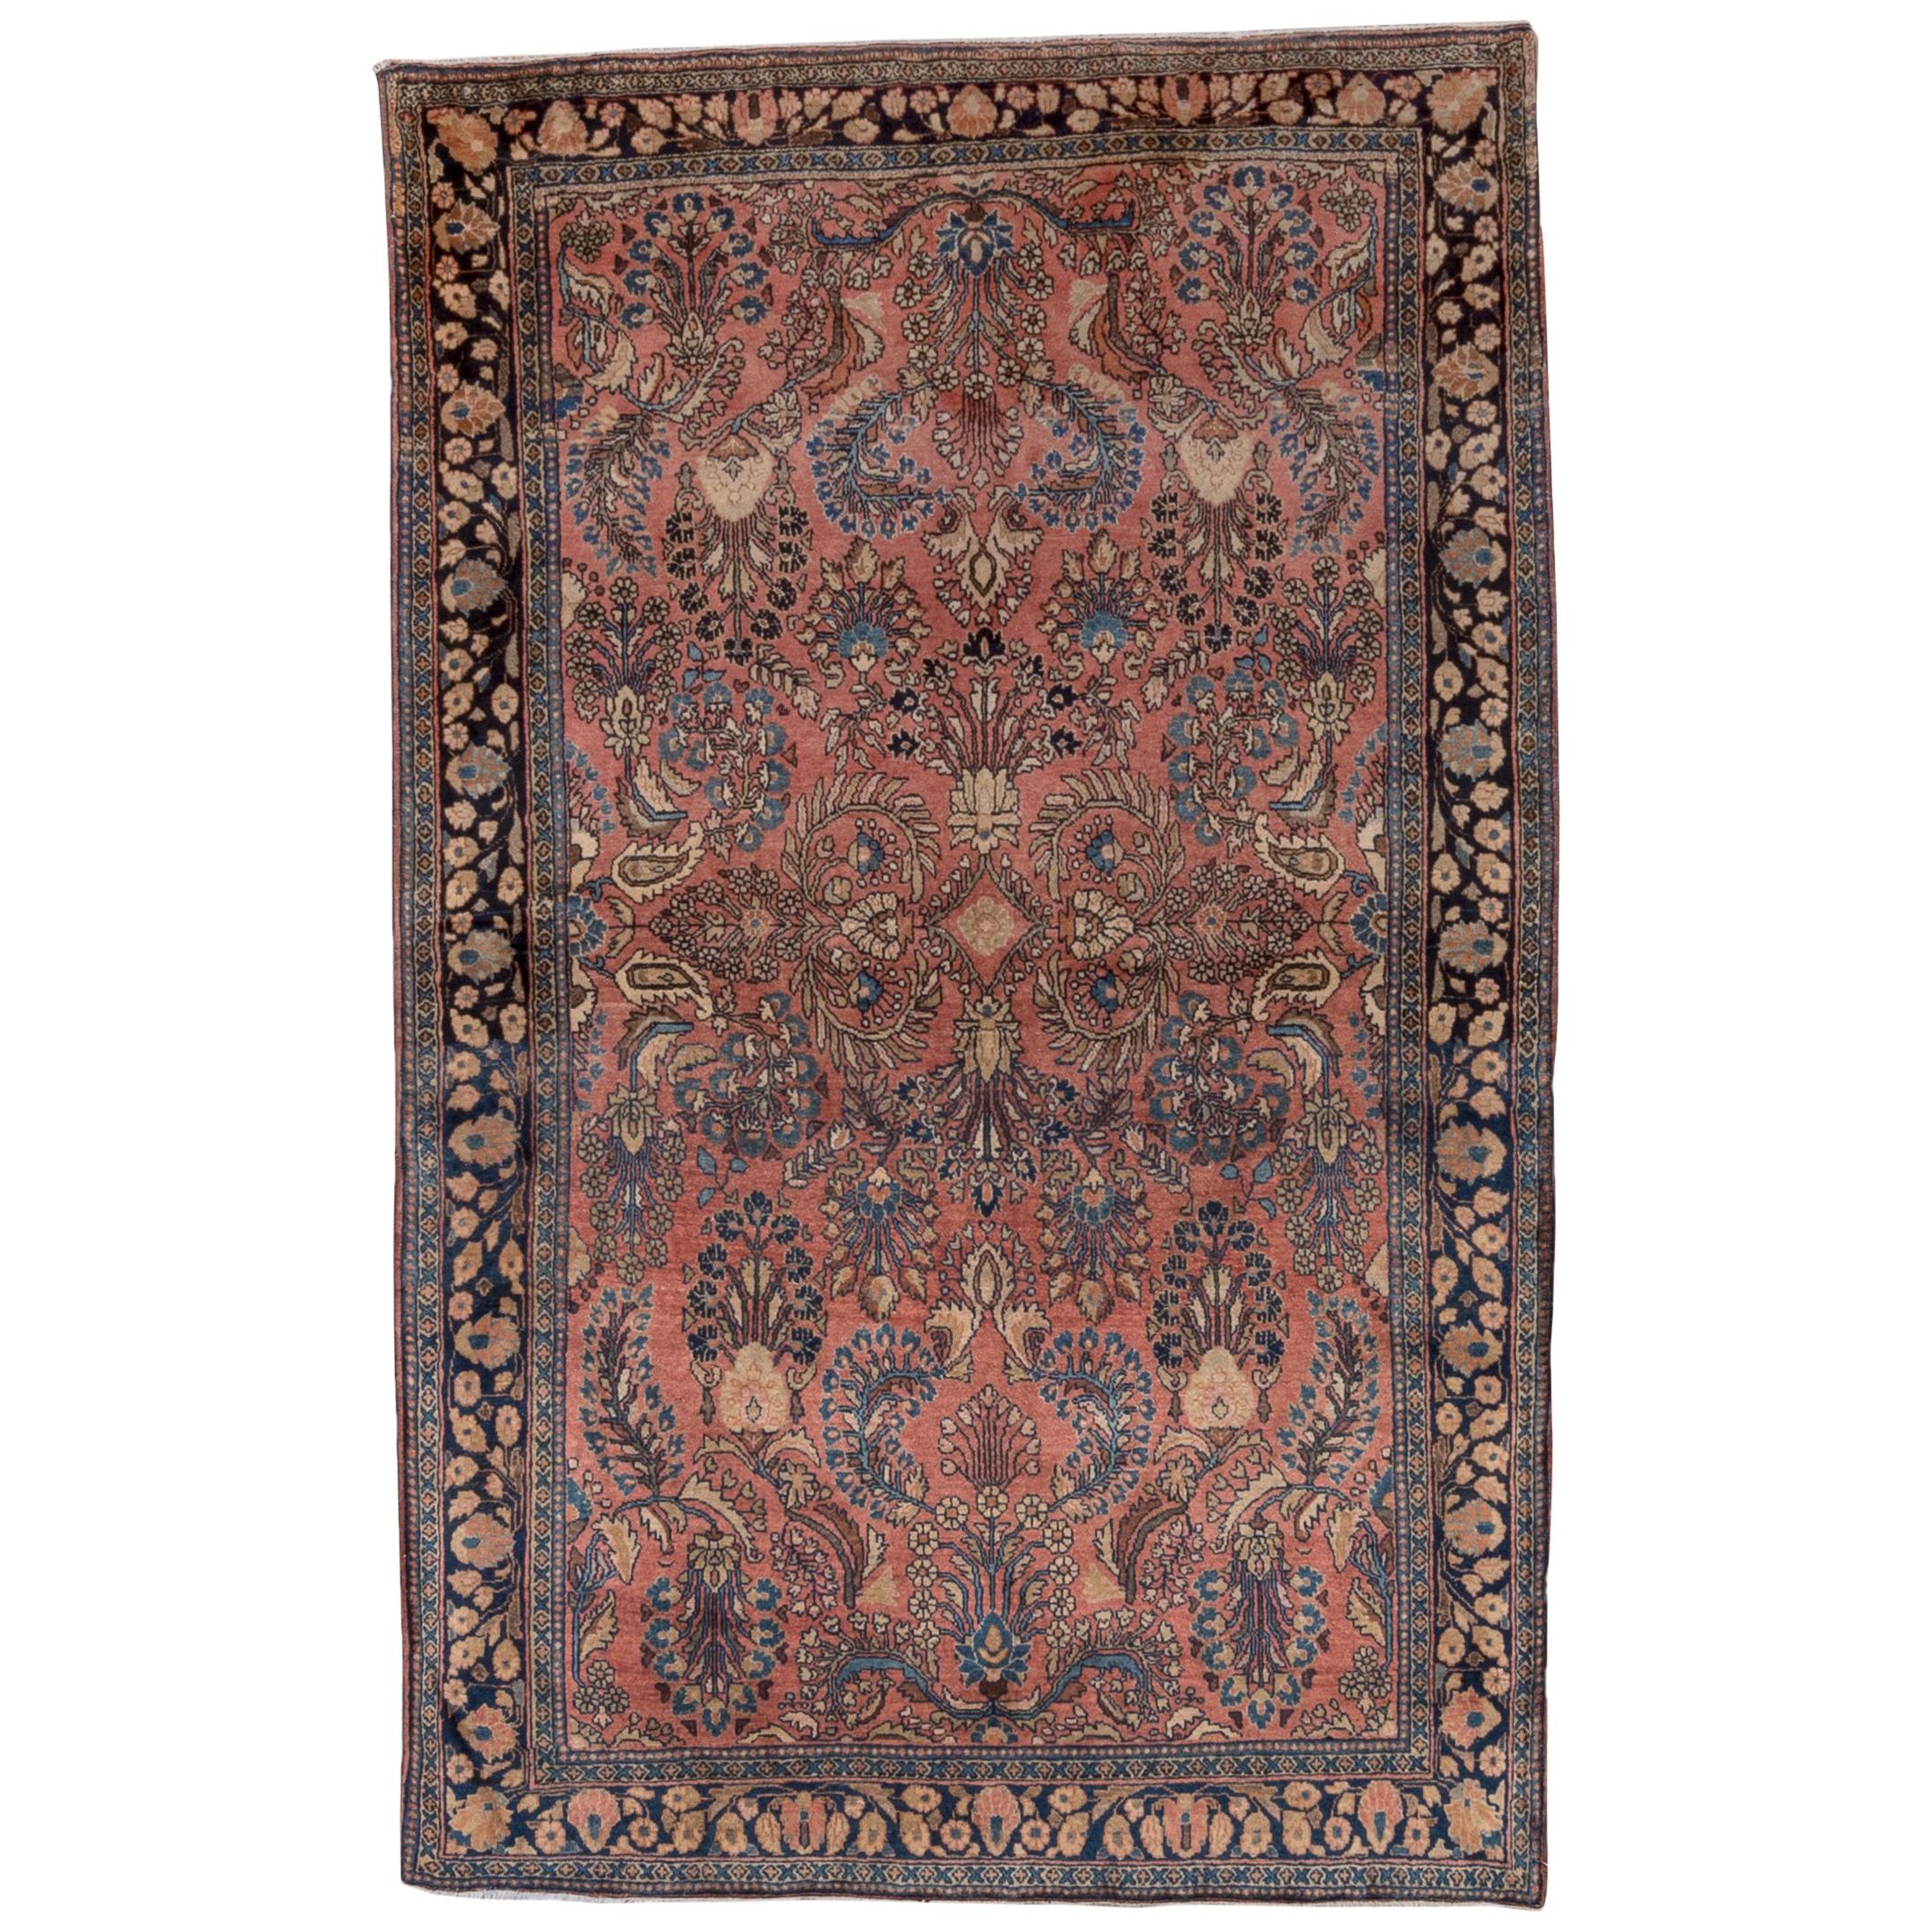 1930s Antique Persian Sarouk Rug with a Salmon Field, American Sarouk Style For Sale